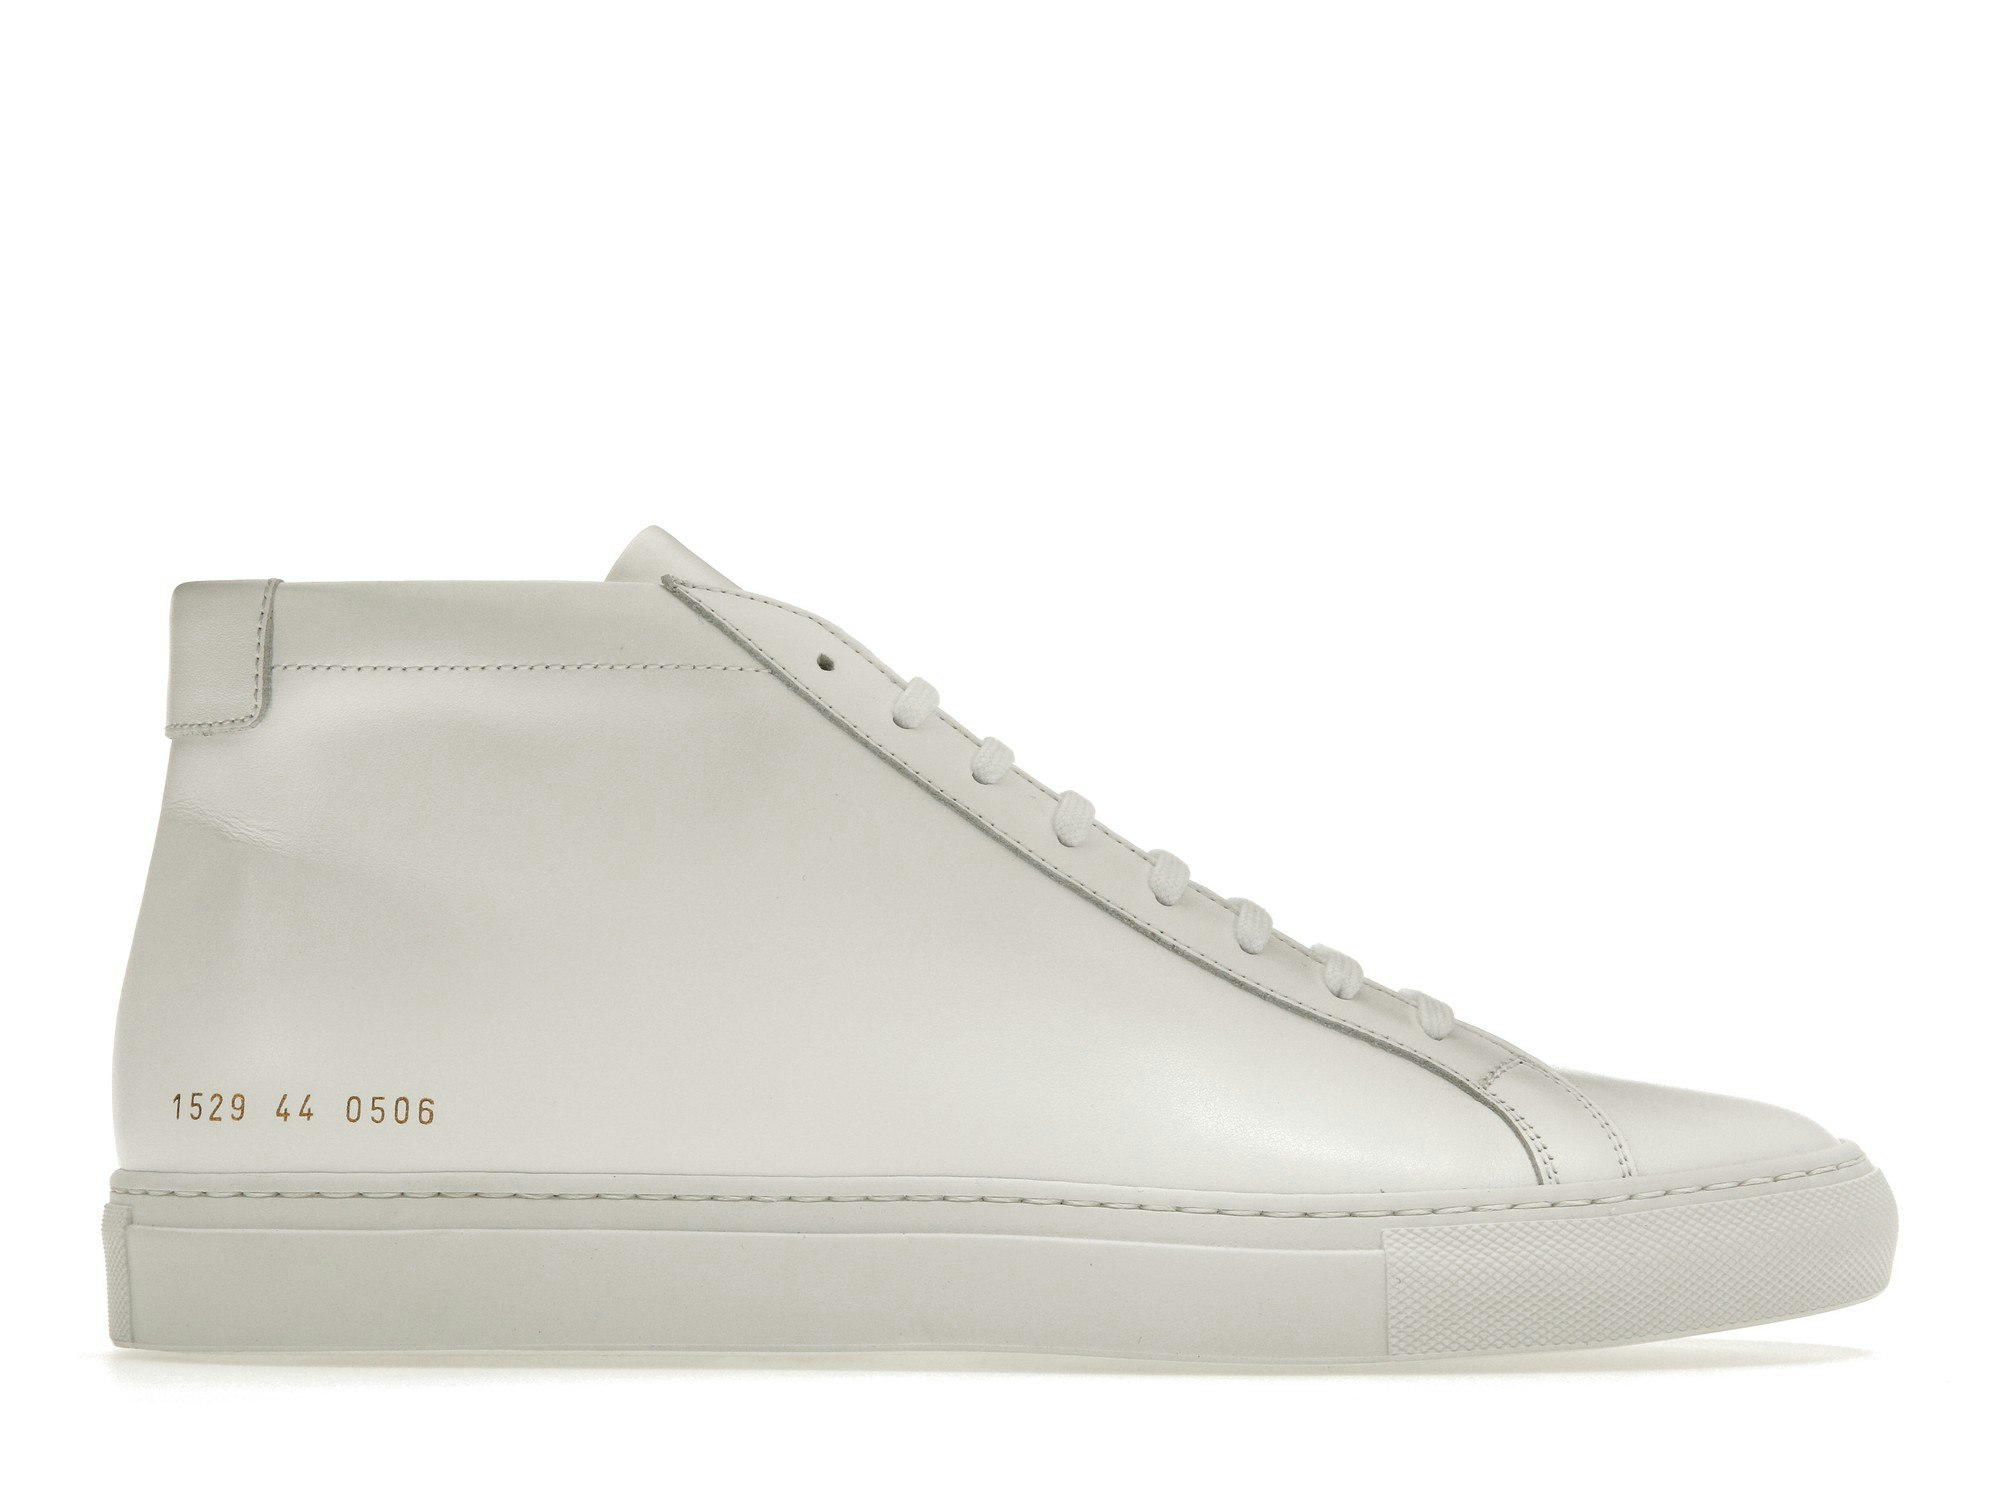 Common Projects for Women - NET-A-PORTER